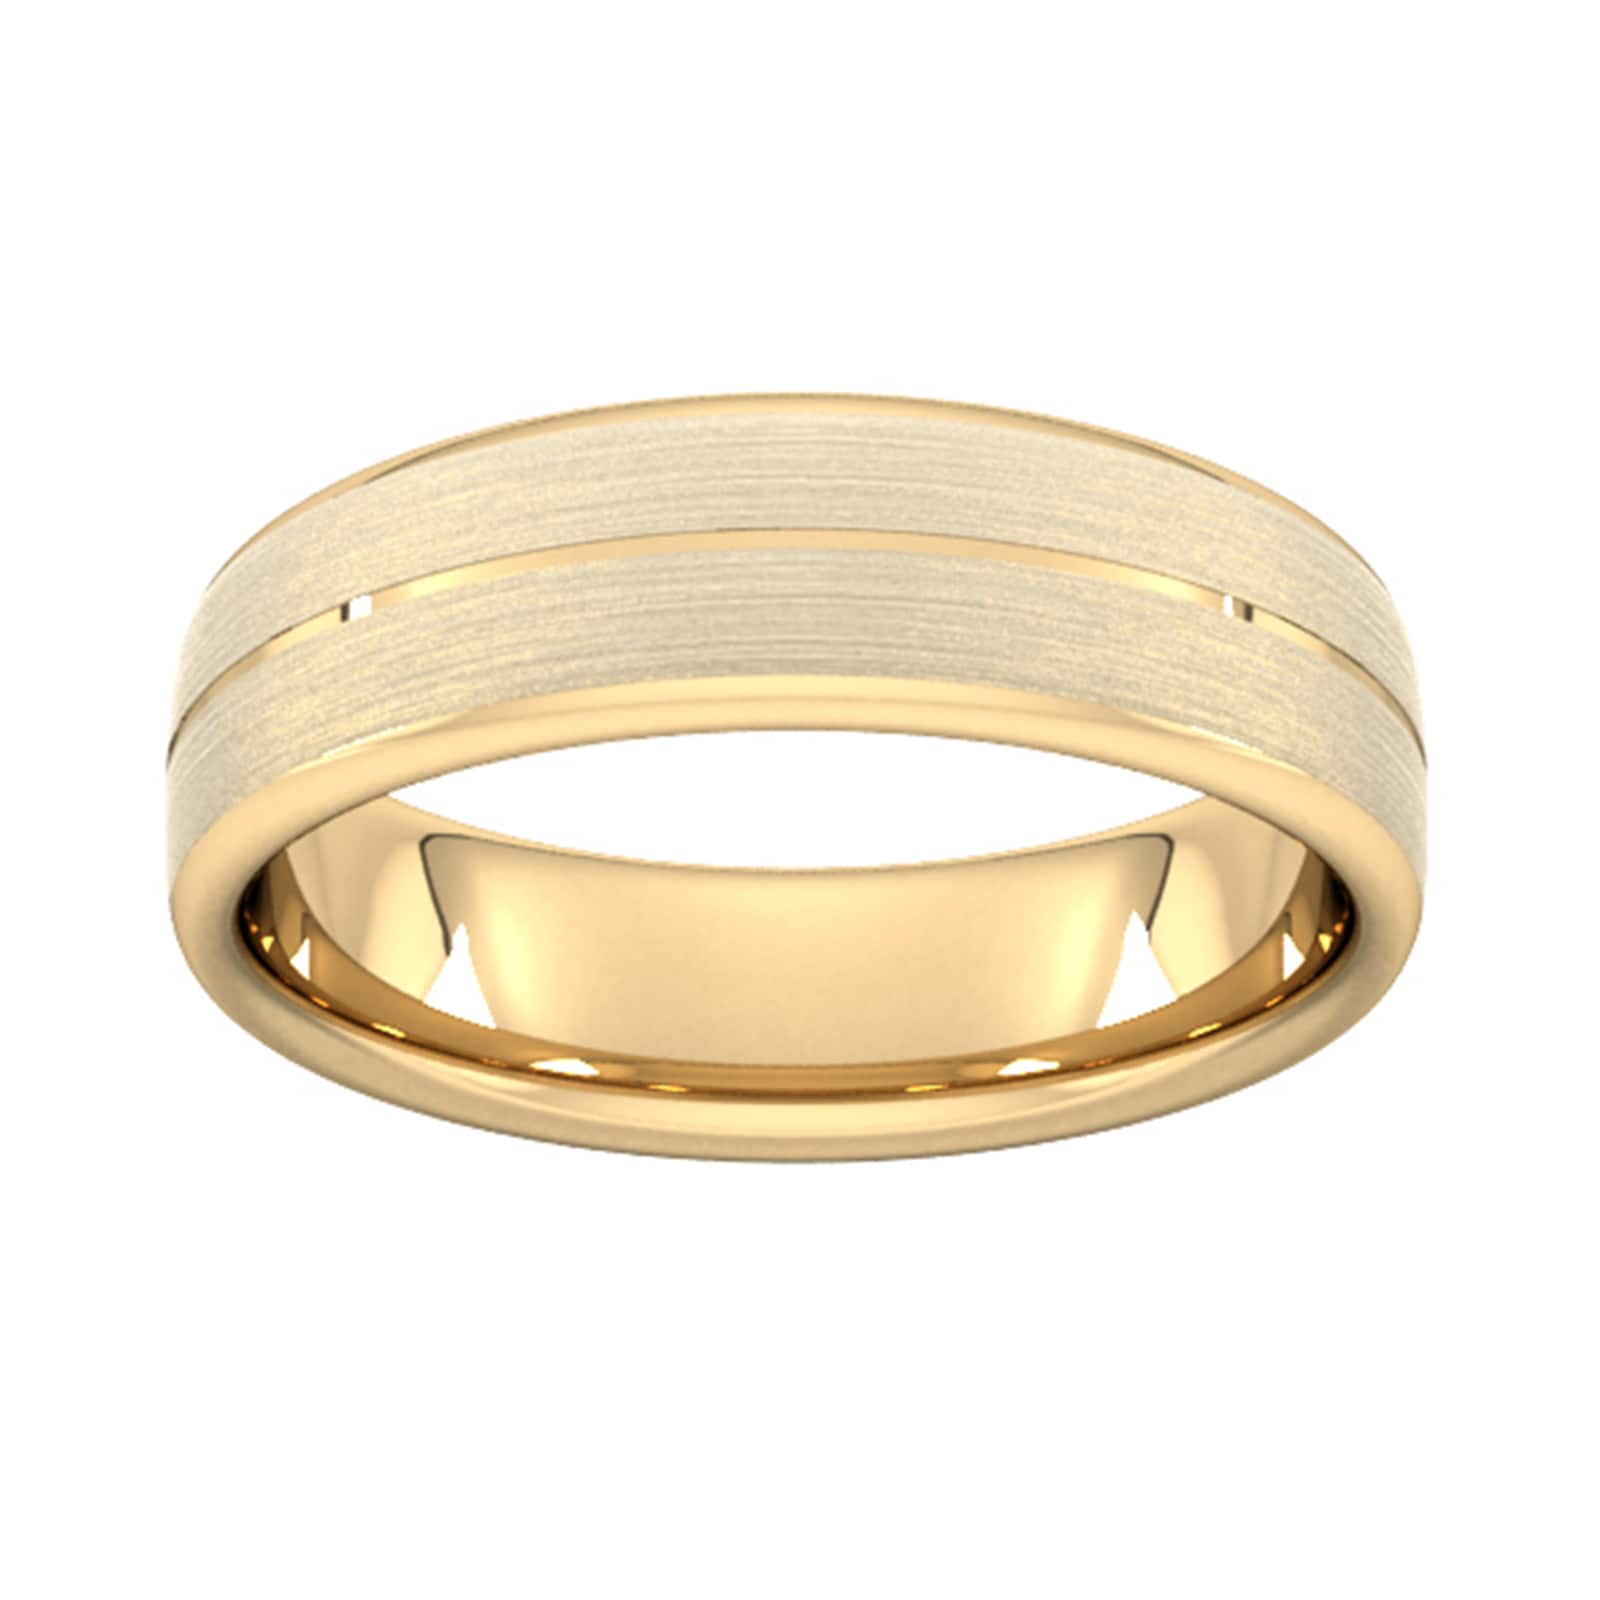 6mm Slight Court Extra Heavy Centre Groove With Chamfered Edge Wedding Ring In 9 Carat Yellow Gold - Ring Size G